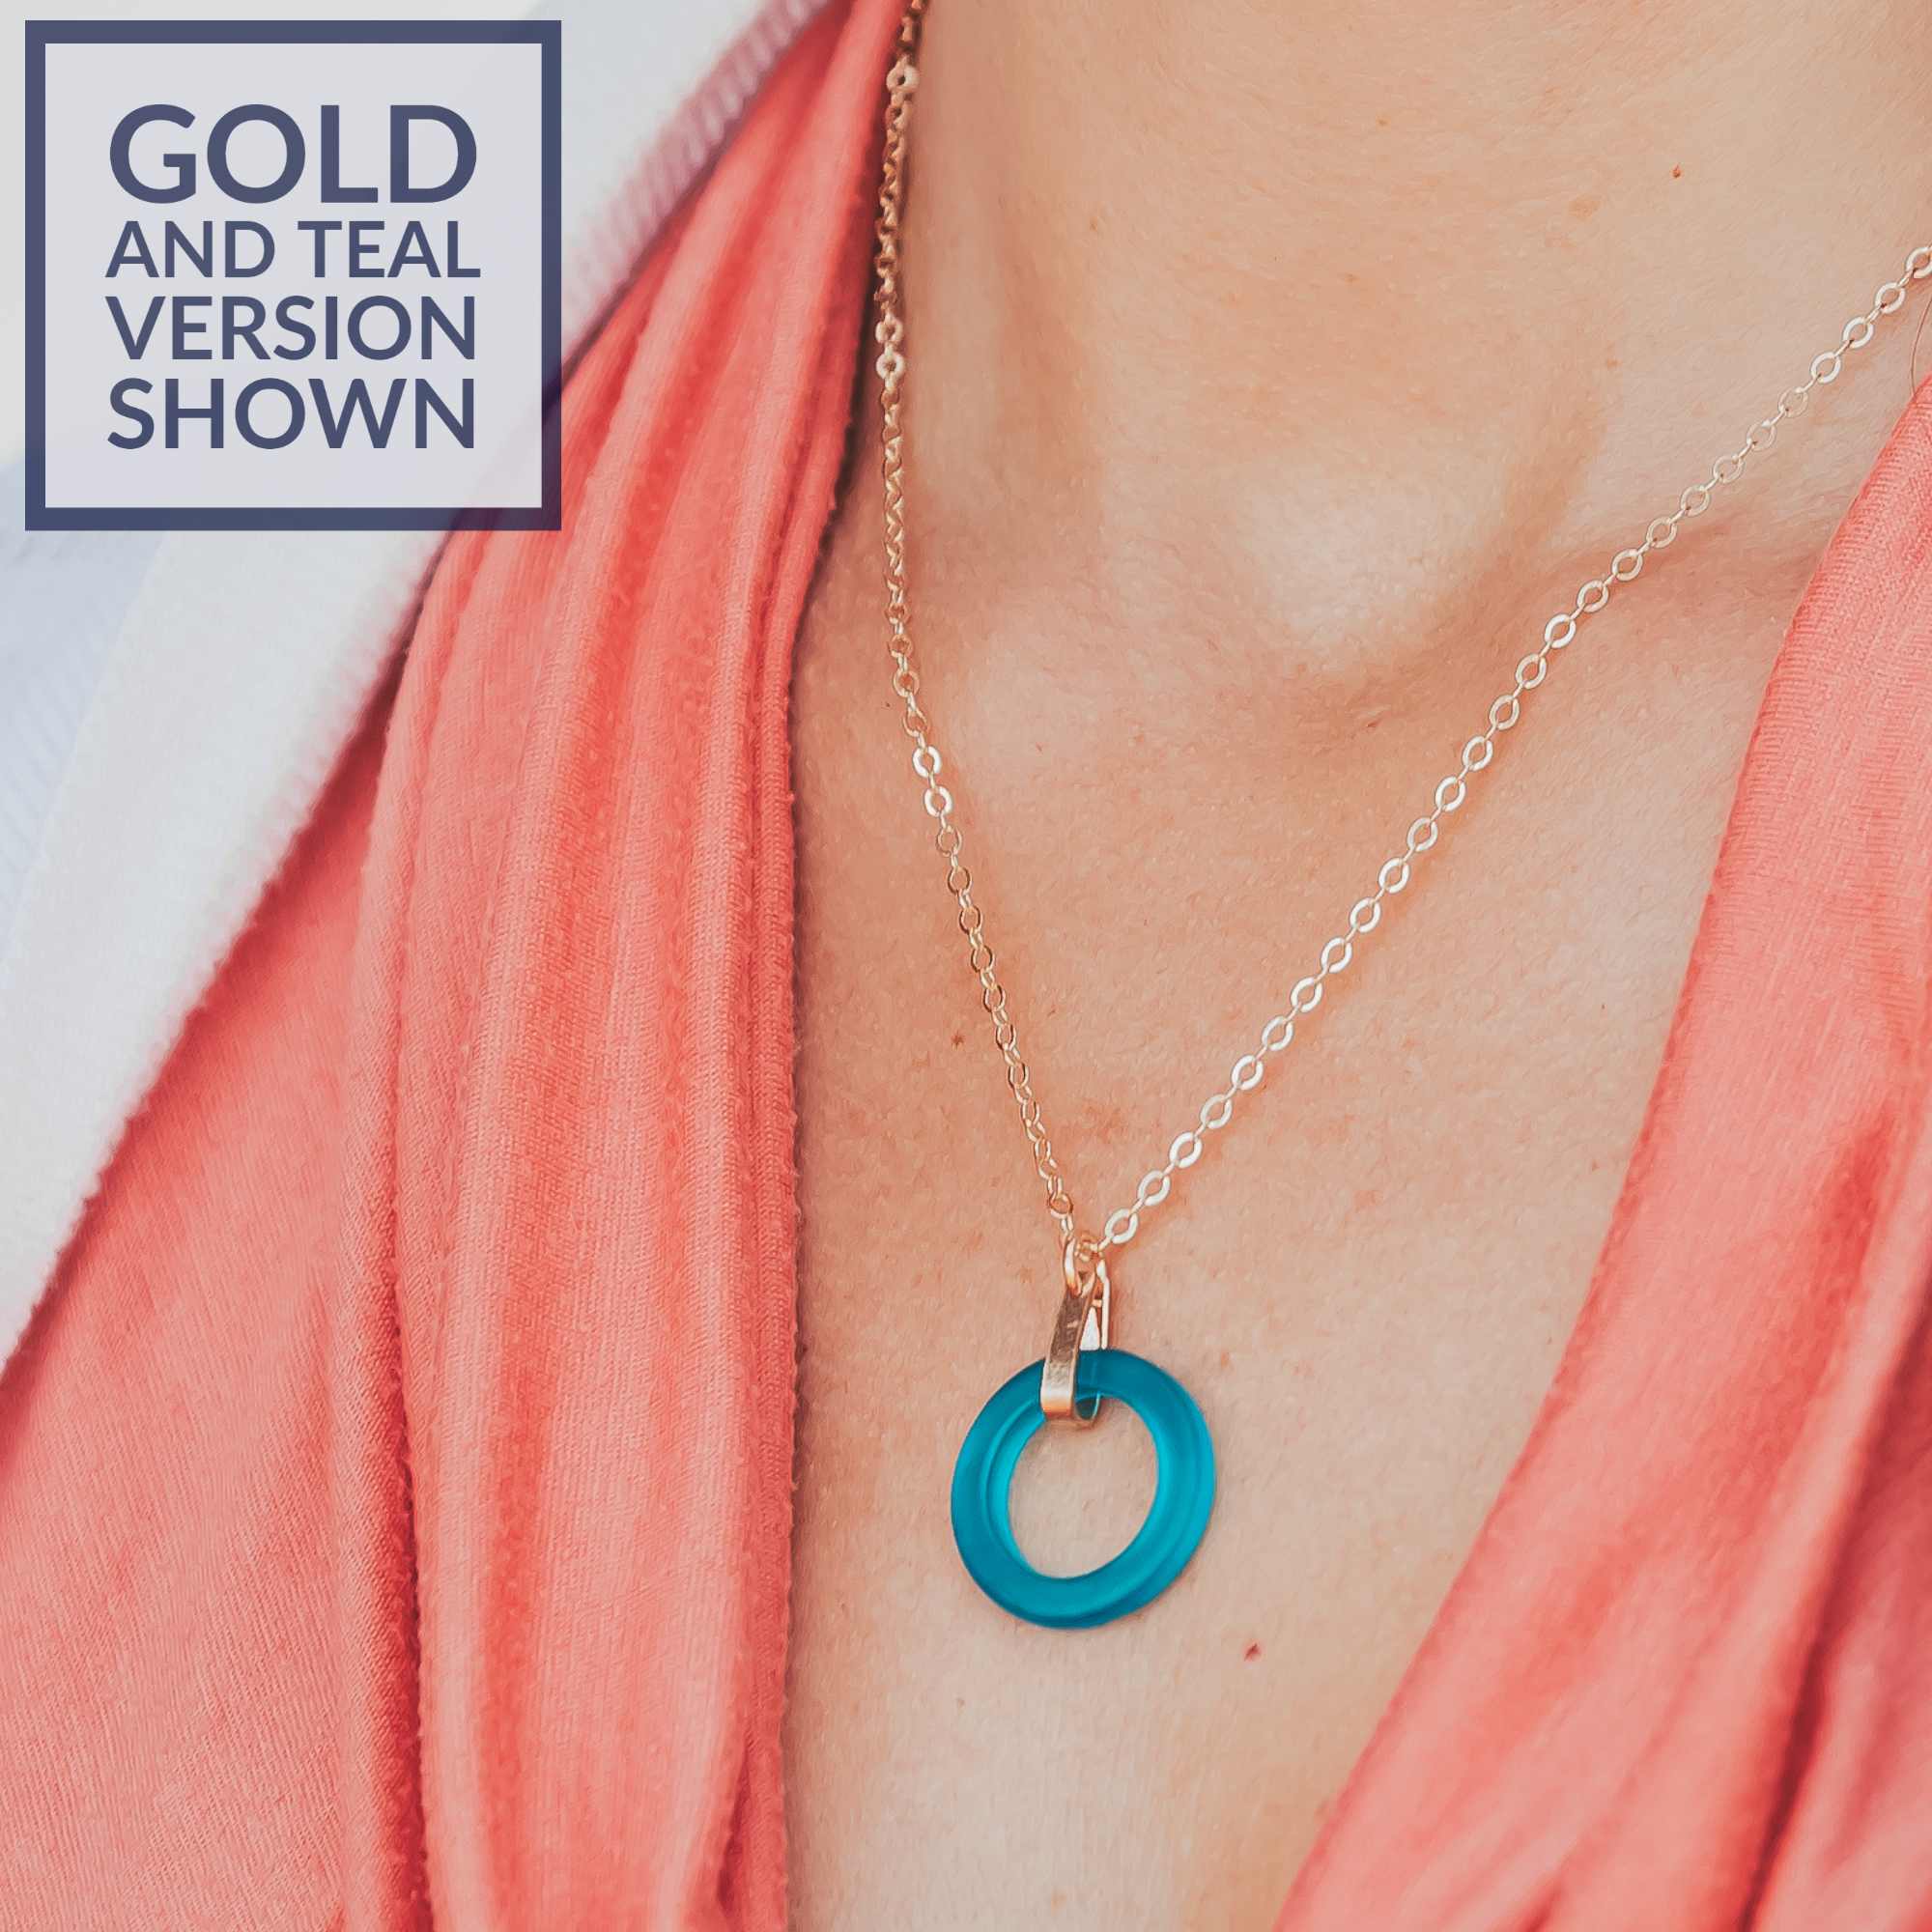 Light Baby Blue Round Recycled Glass Open Circle and 14K Gold Fill Strap Style Pendant Necklace